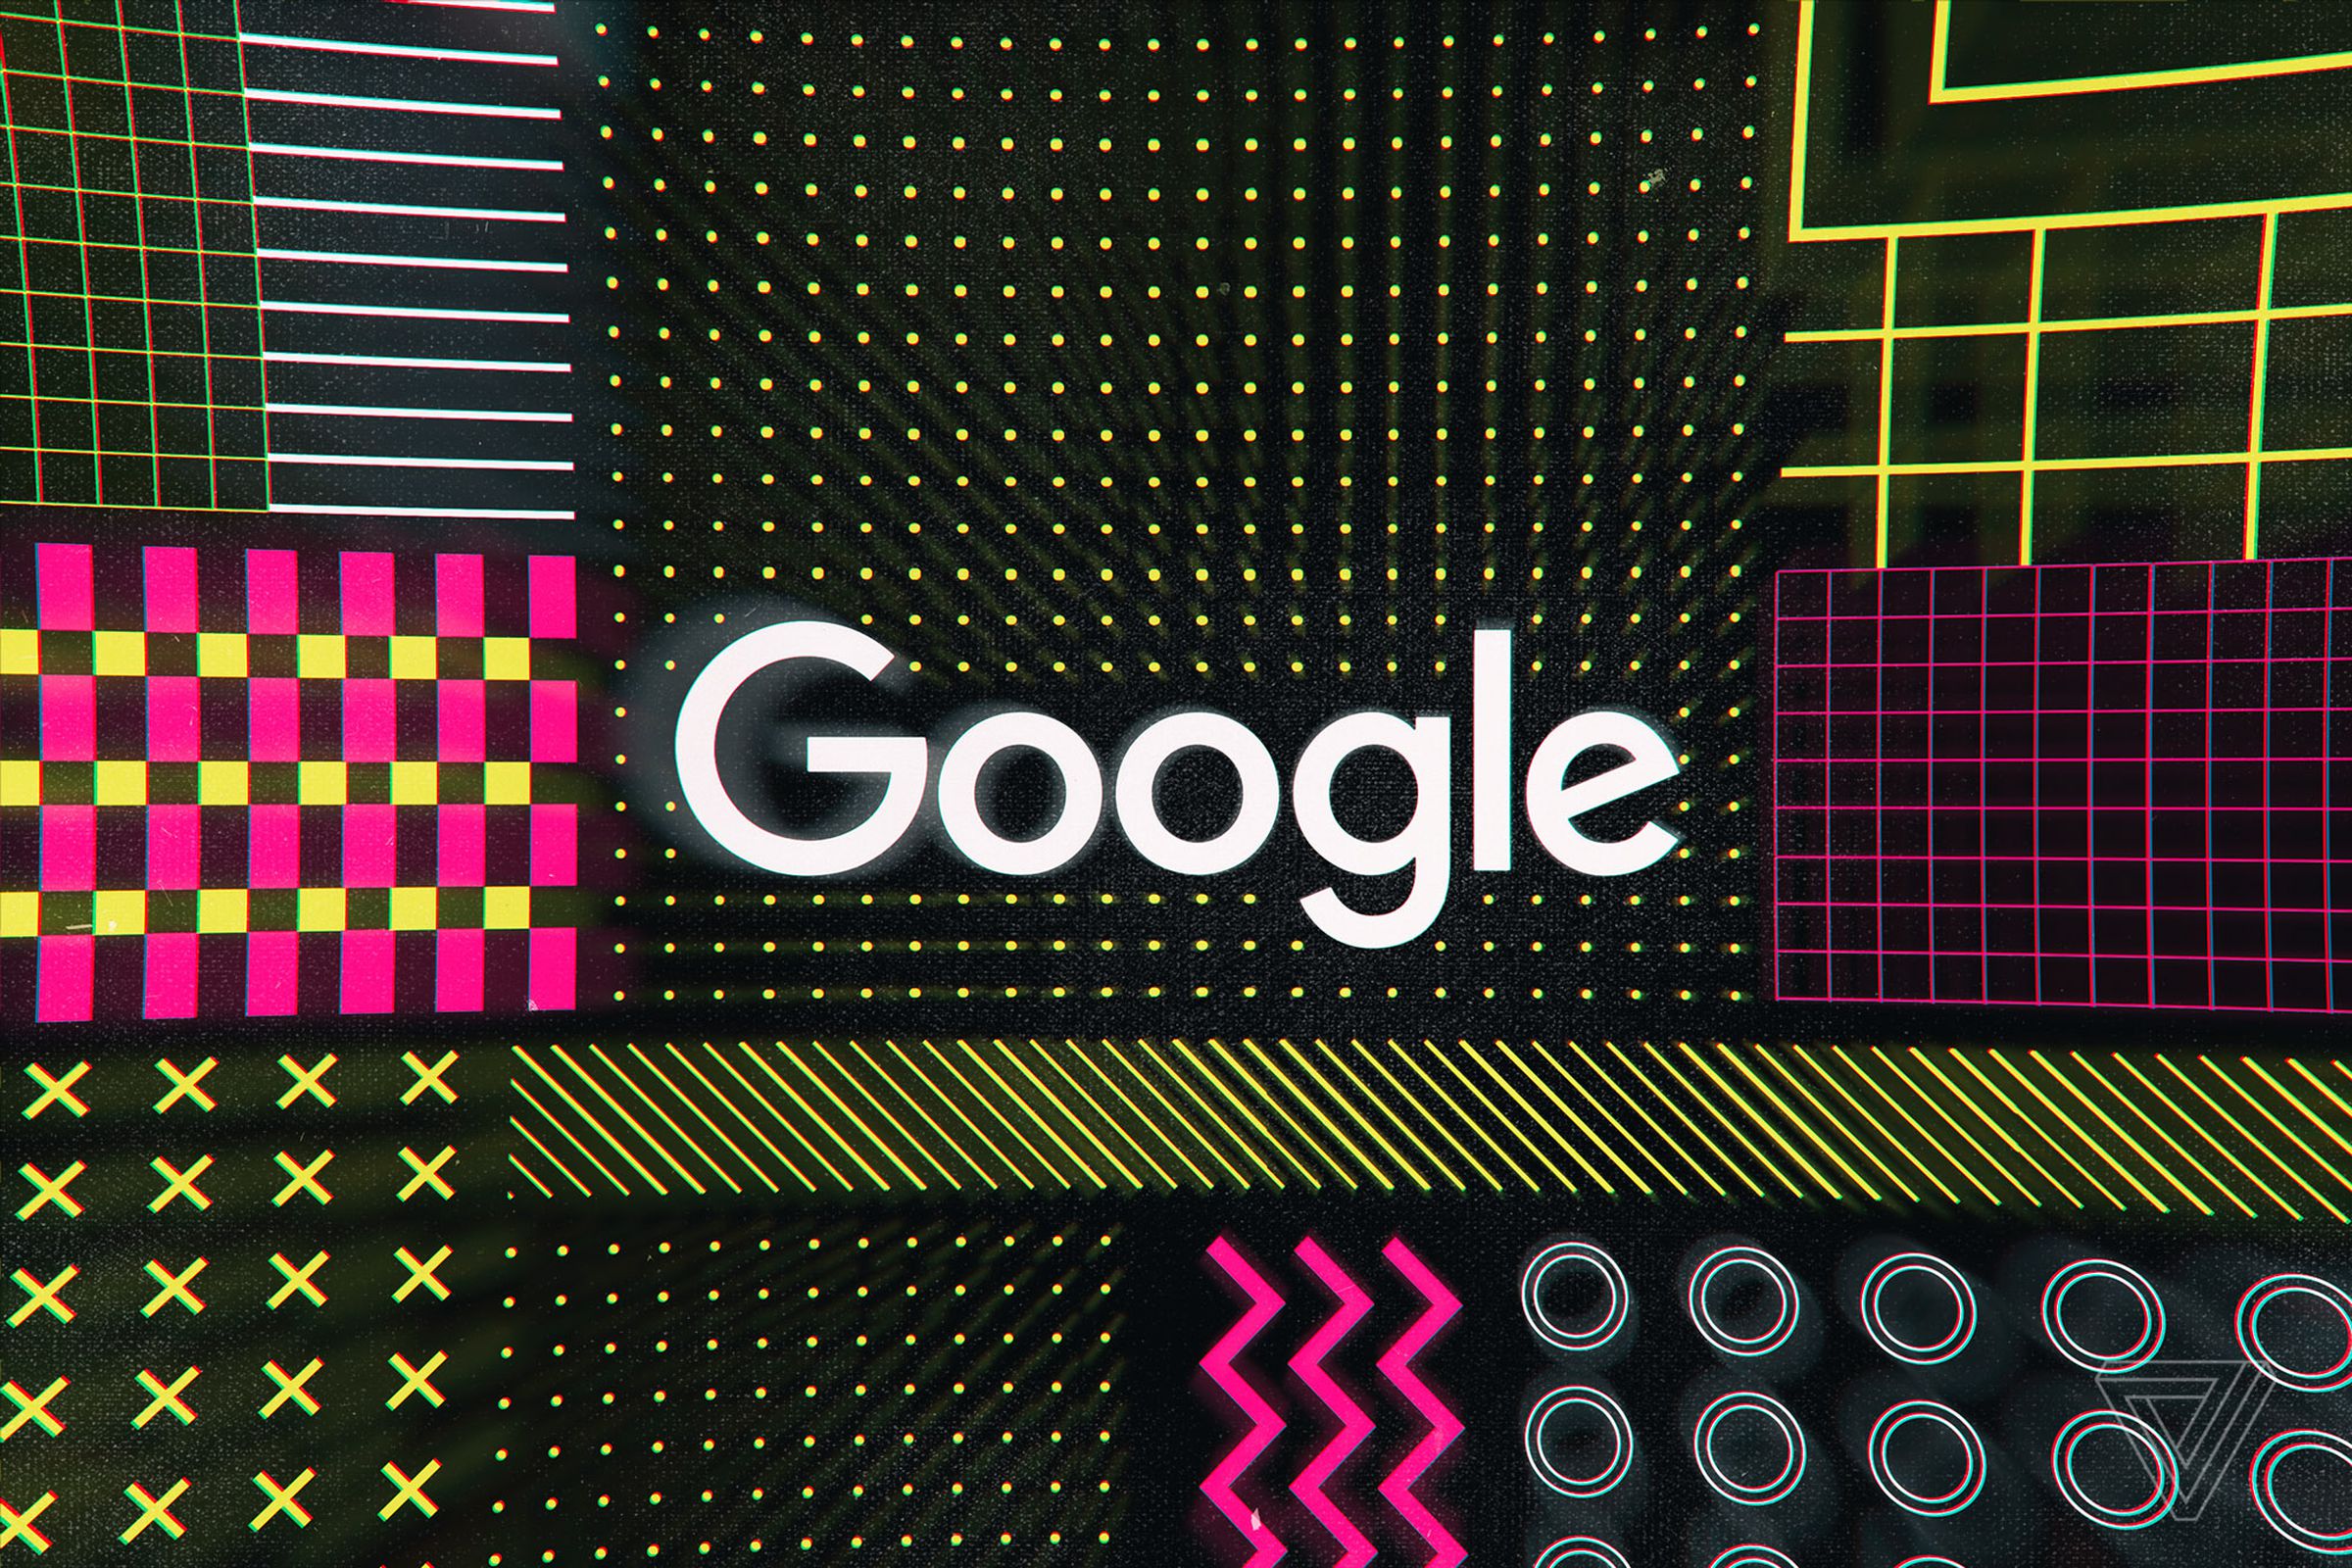 The Google logo on a colorful, geometric background